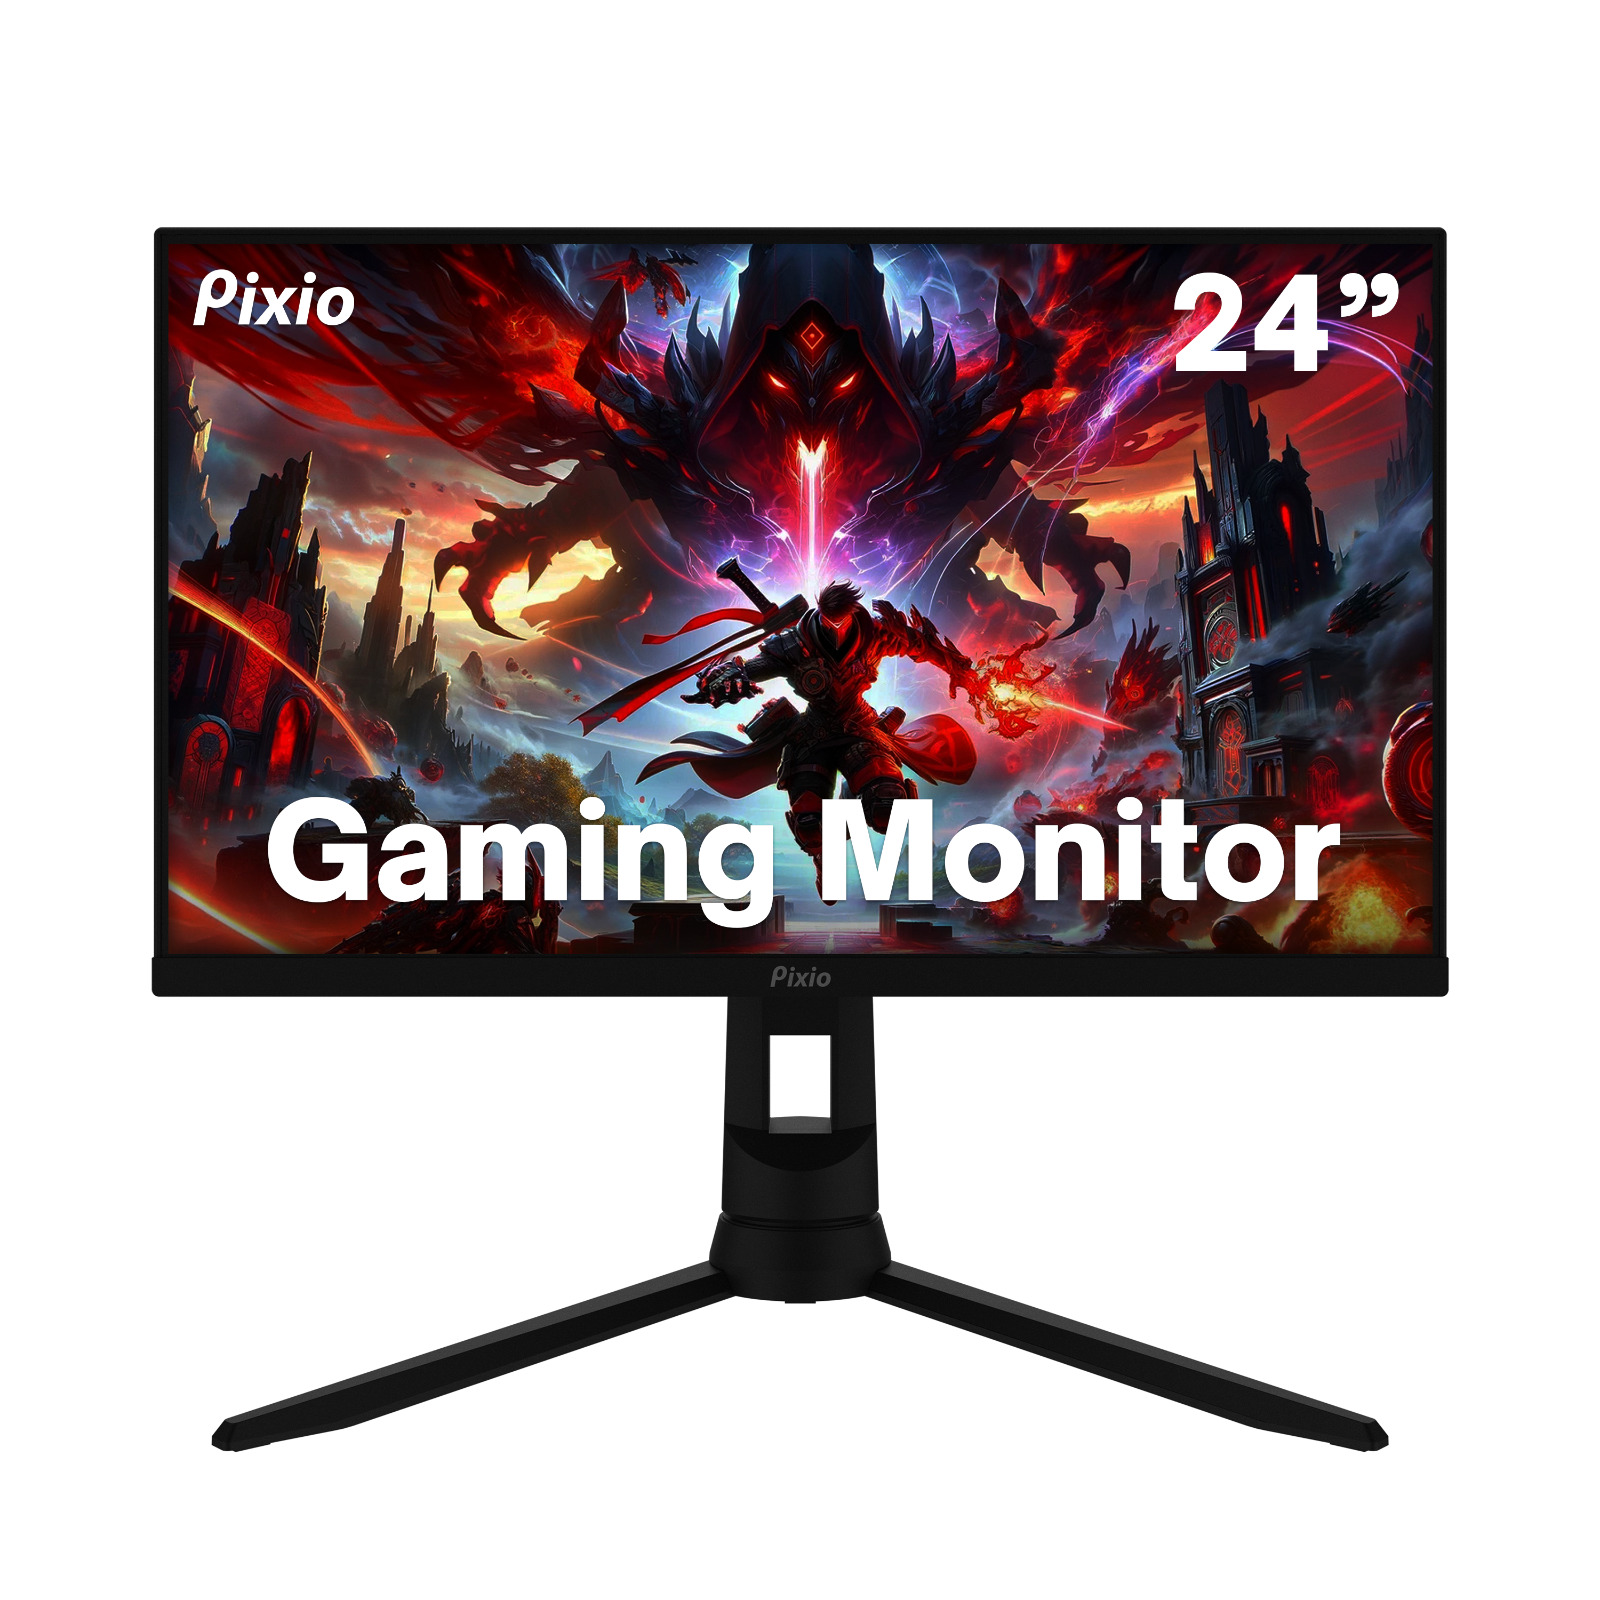 Pixio PX248 PRO 24 inch 165Hz 1080p 1ms GTG FAST IPS Professional Gaming Monitor